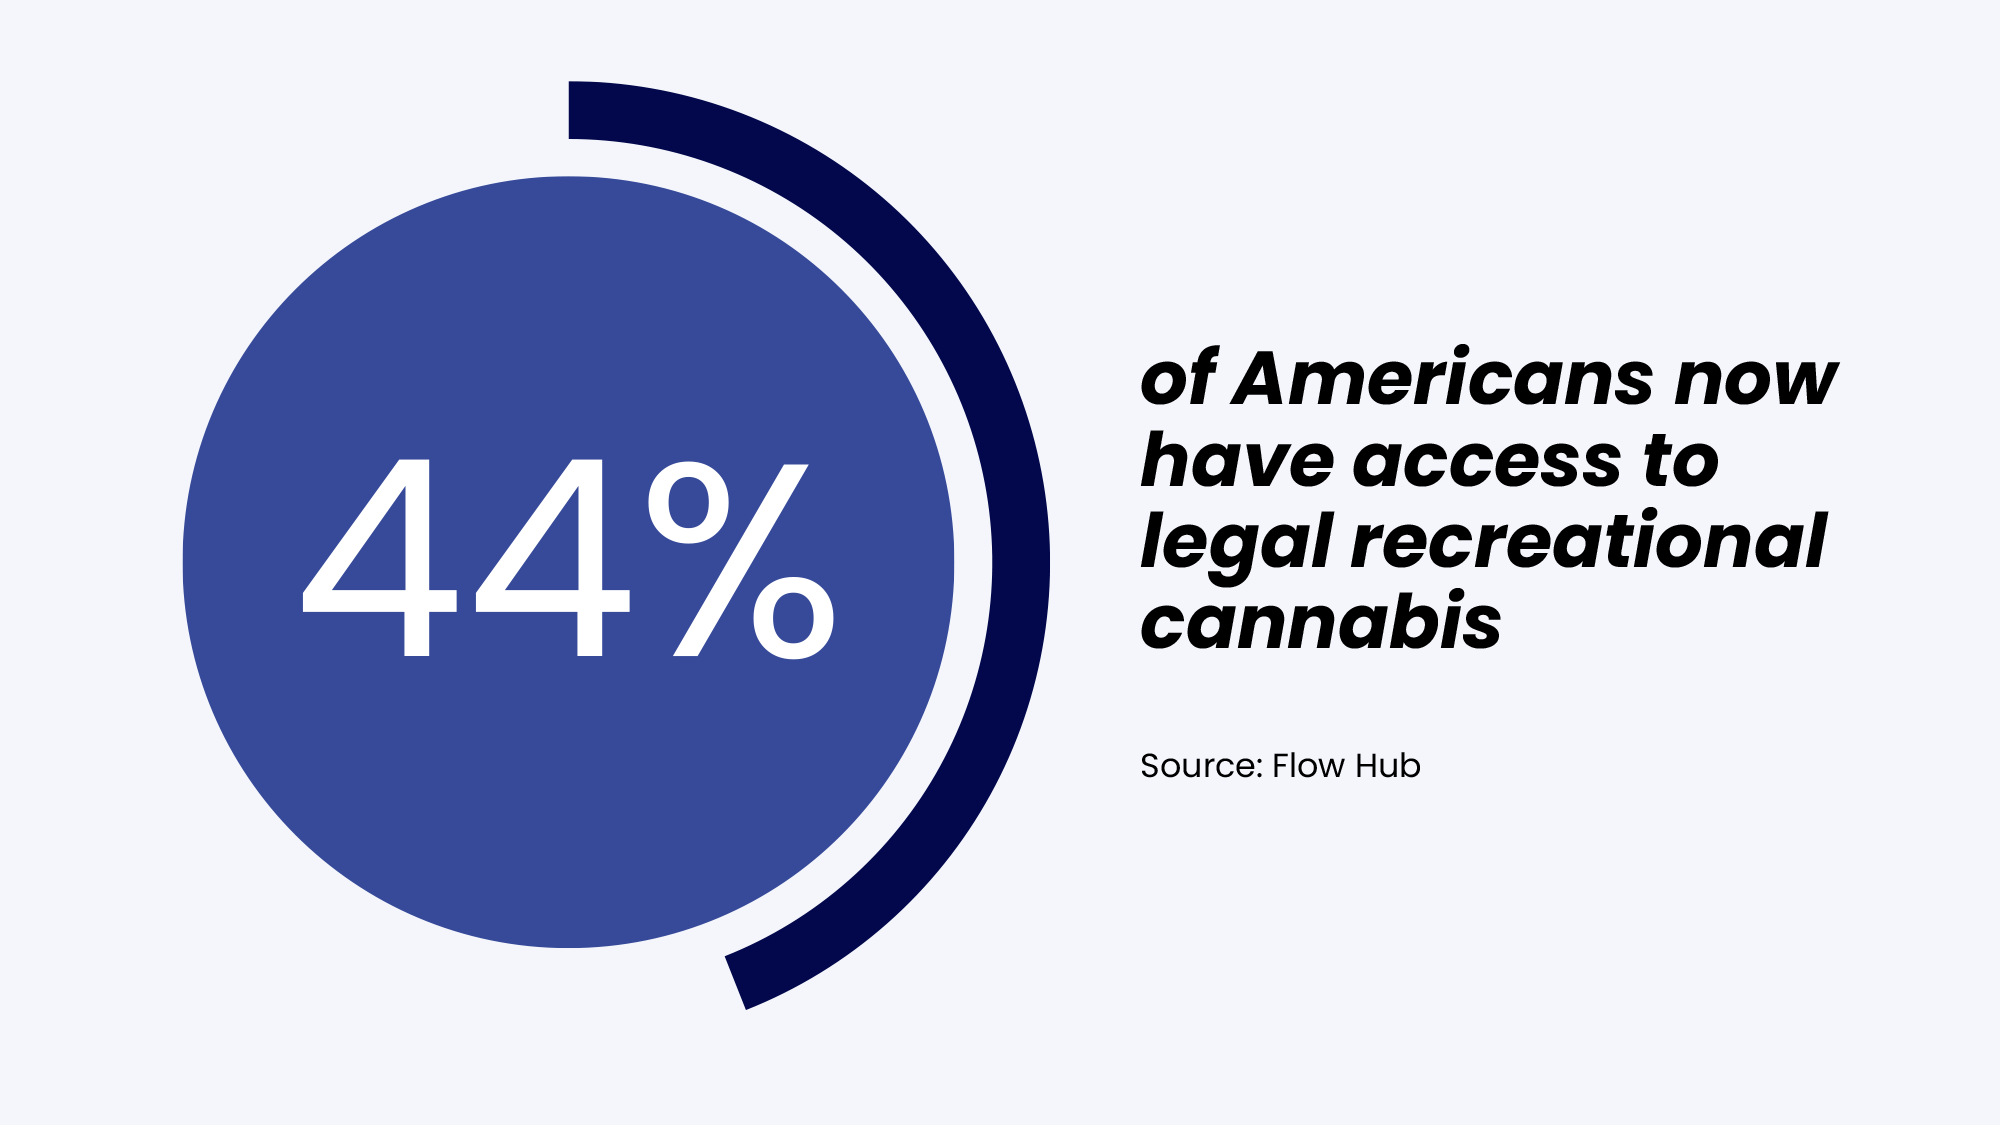 44% of Americans now have access to legal recreational cannabis